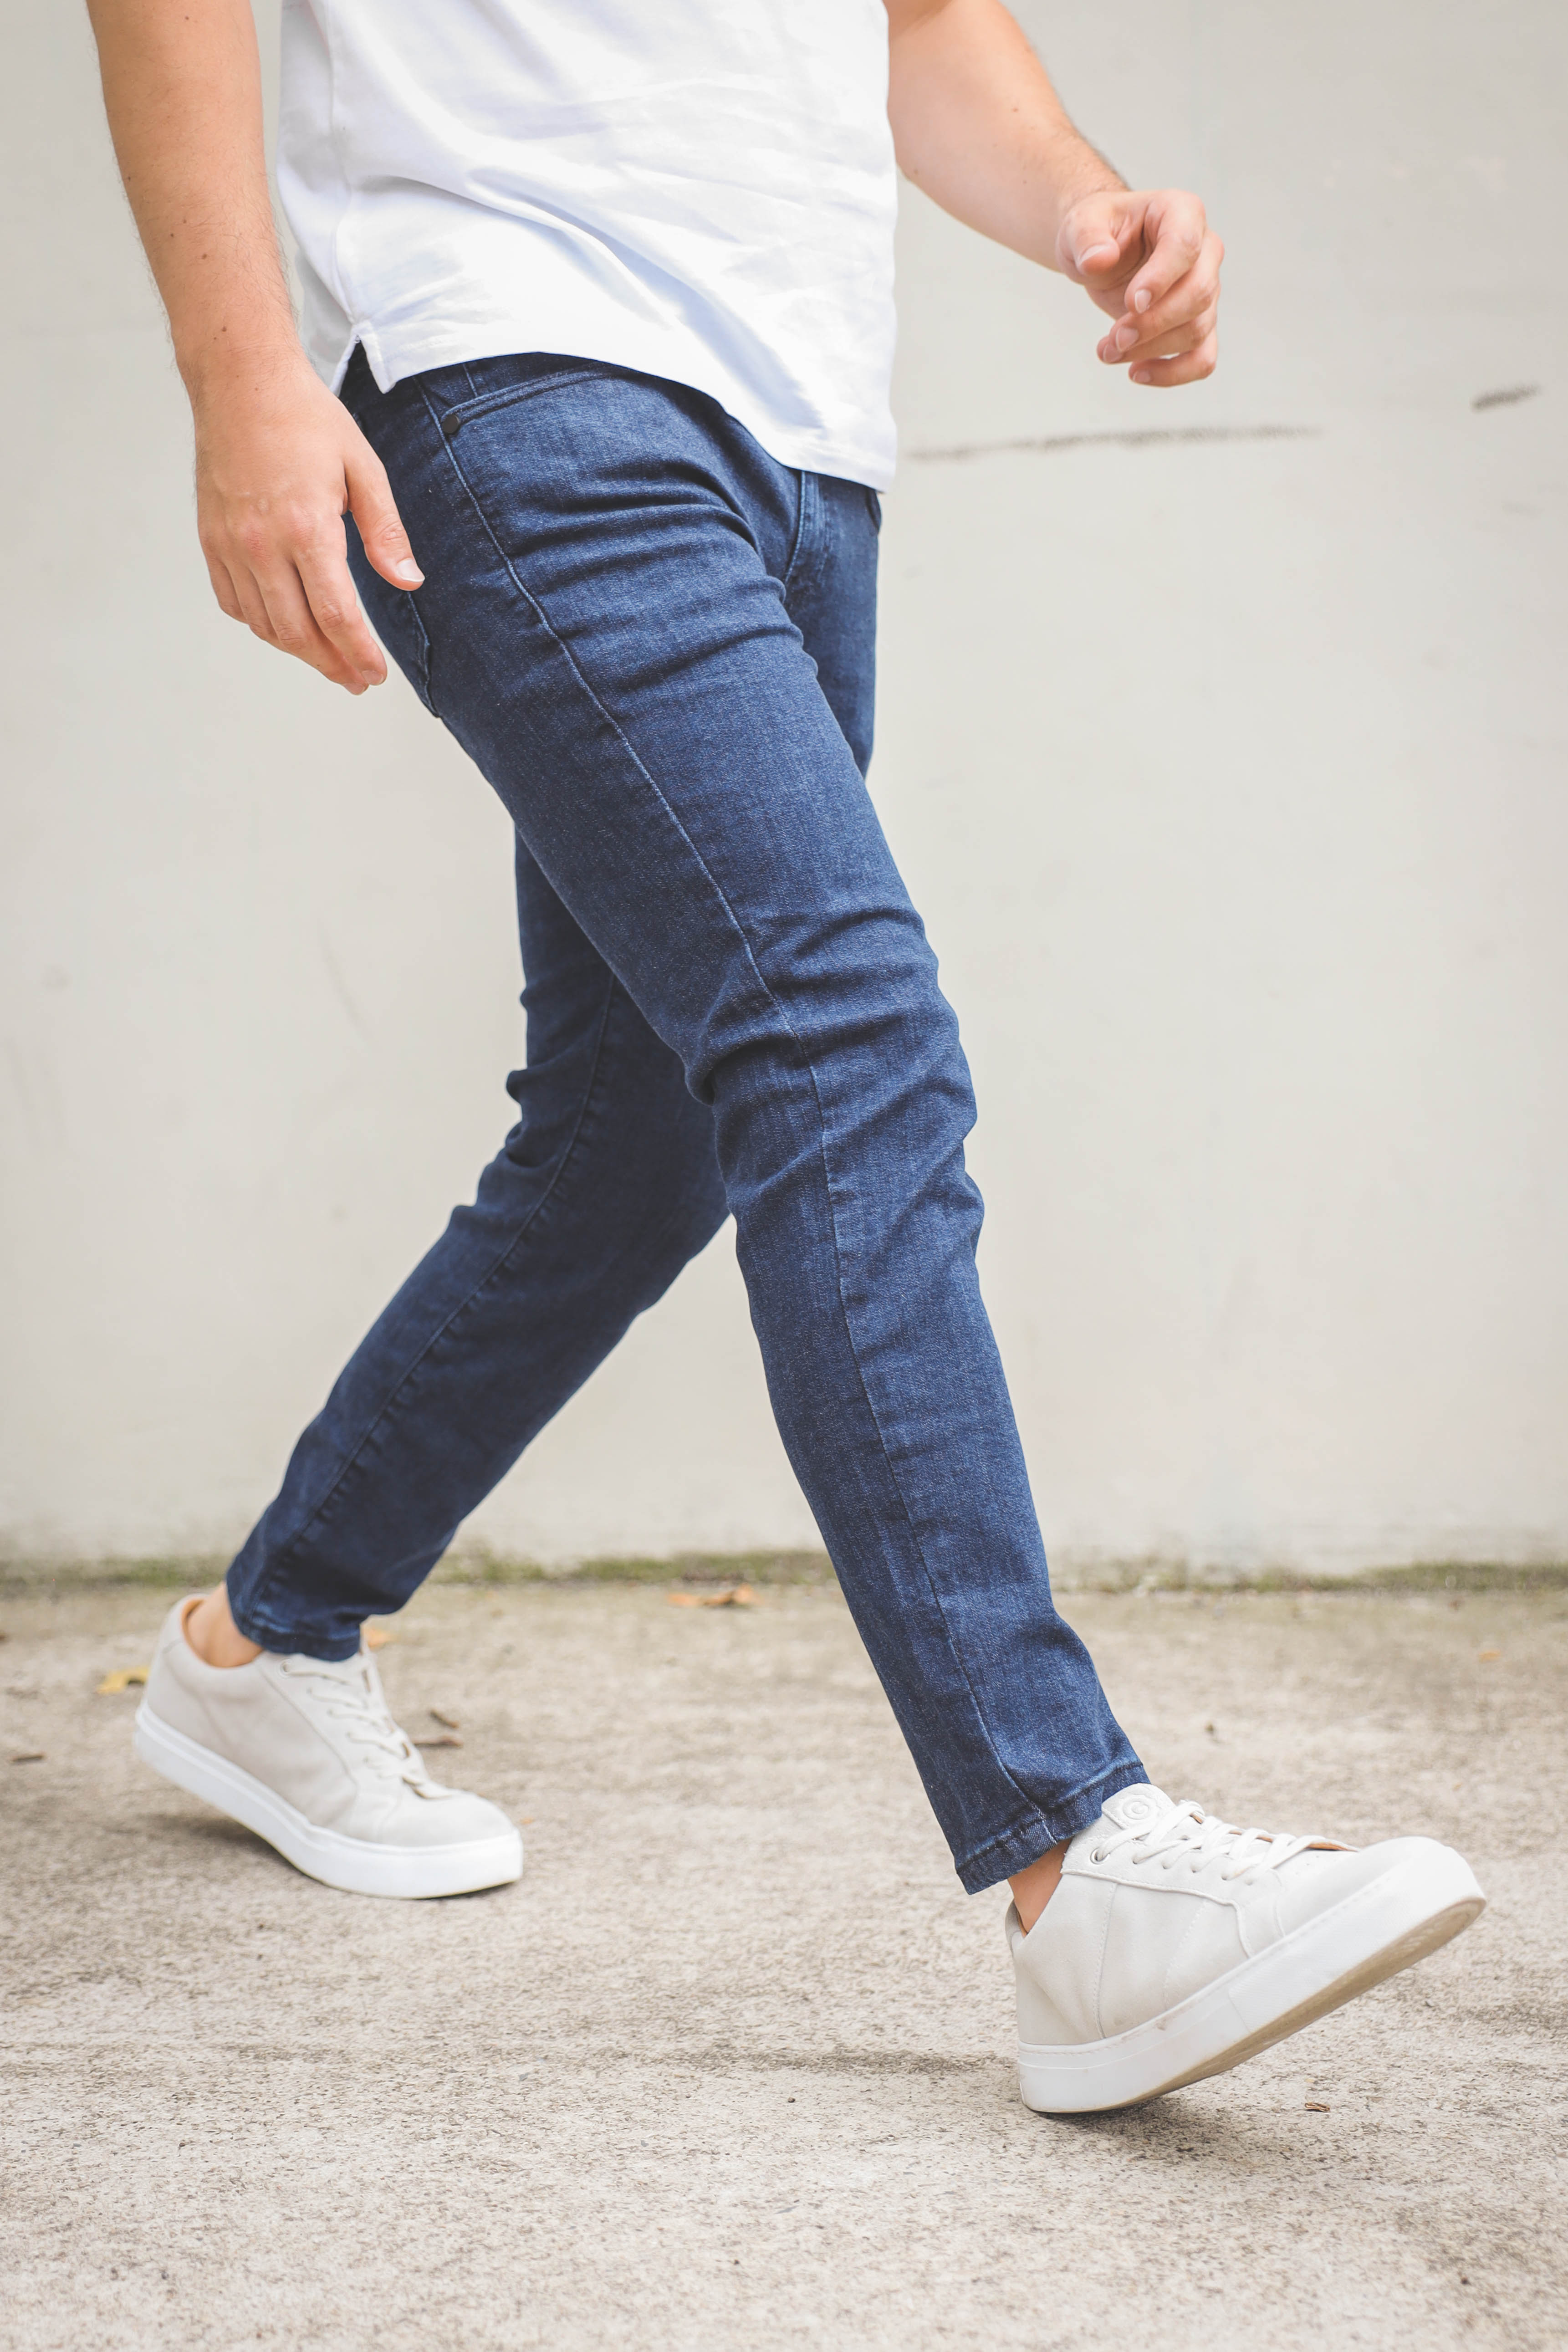 Jeans for Short Men  A Guide to the Best Jeans for Men - Nimble Made